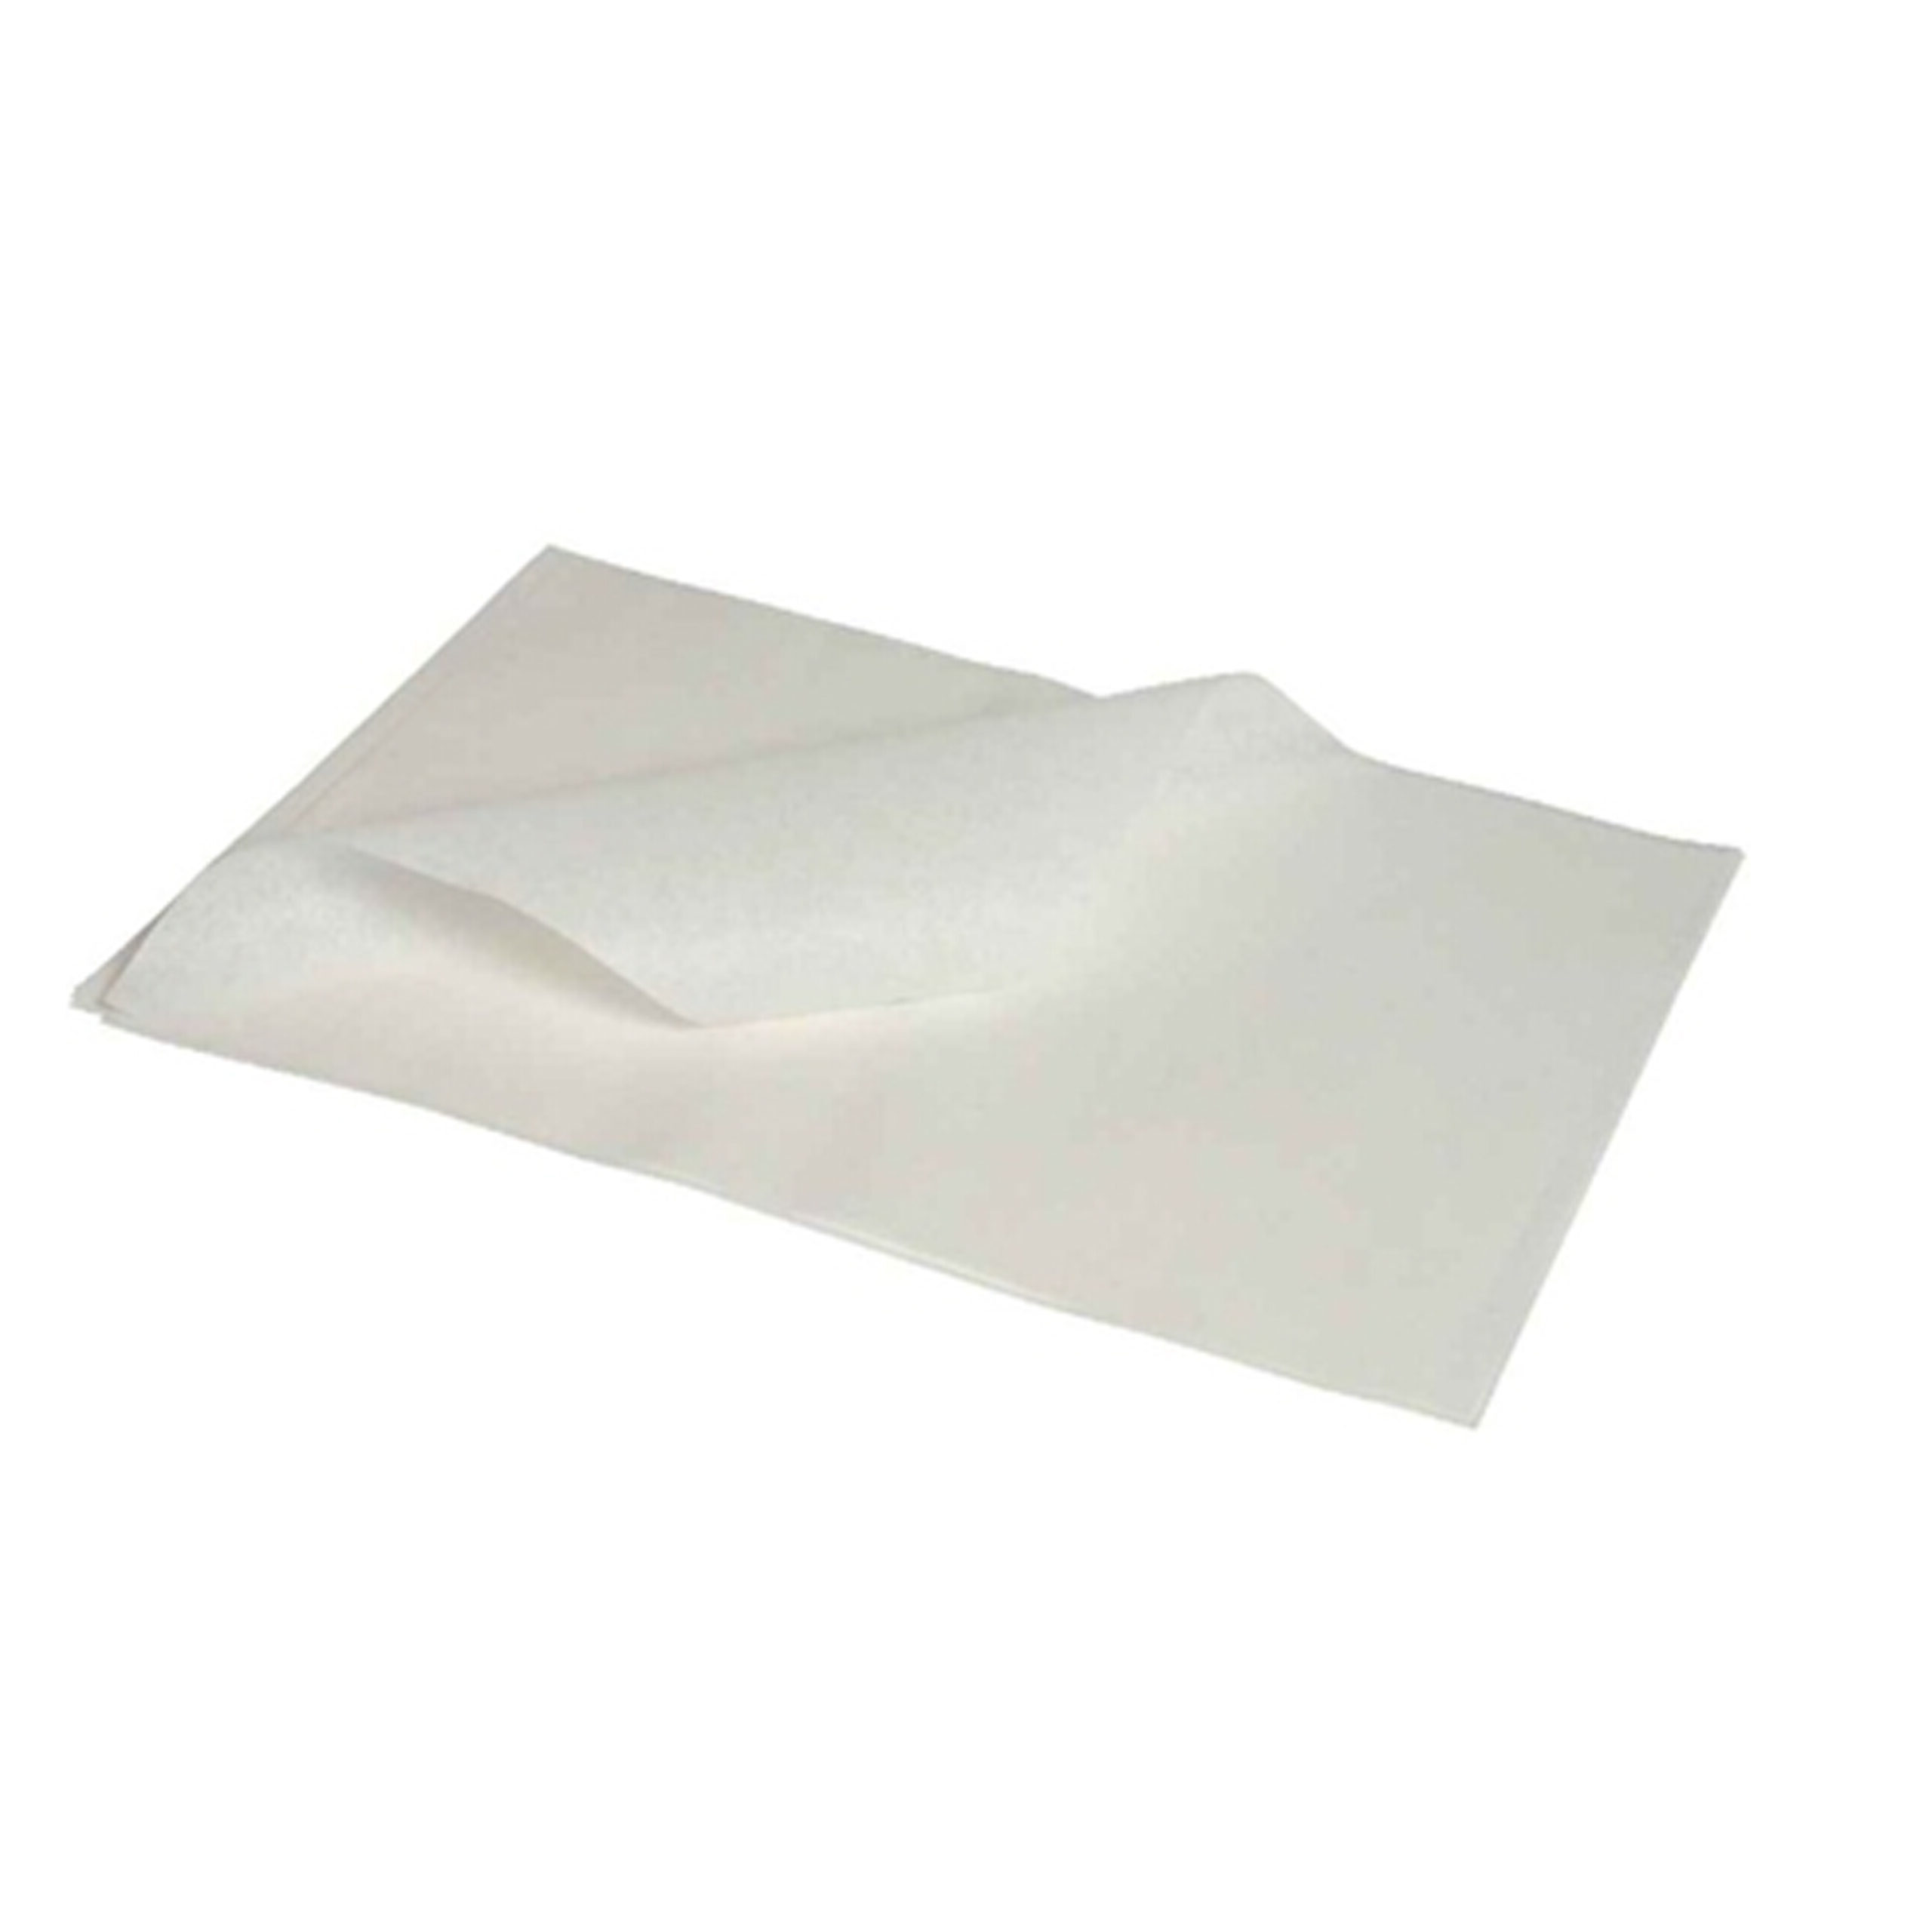 GREASE PROOF
PAPER REAM
FROSTED 42x70 (+/-
150 SHEETS) 2KG